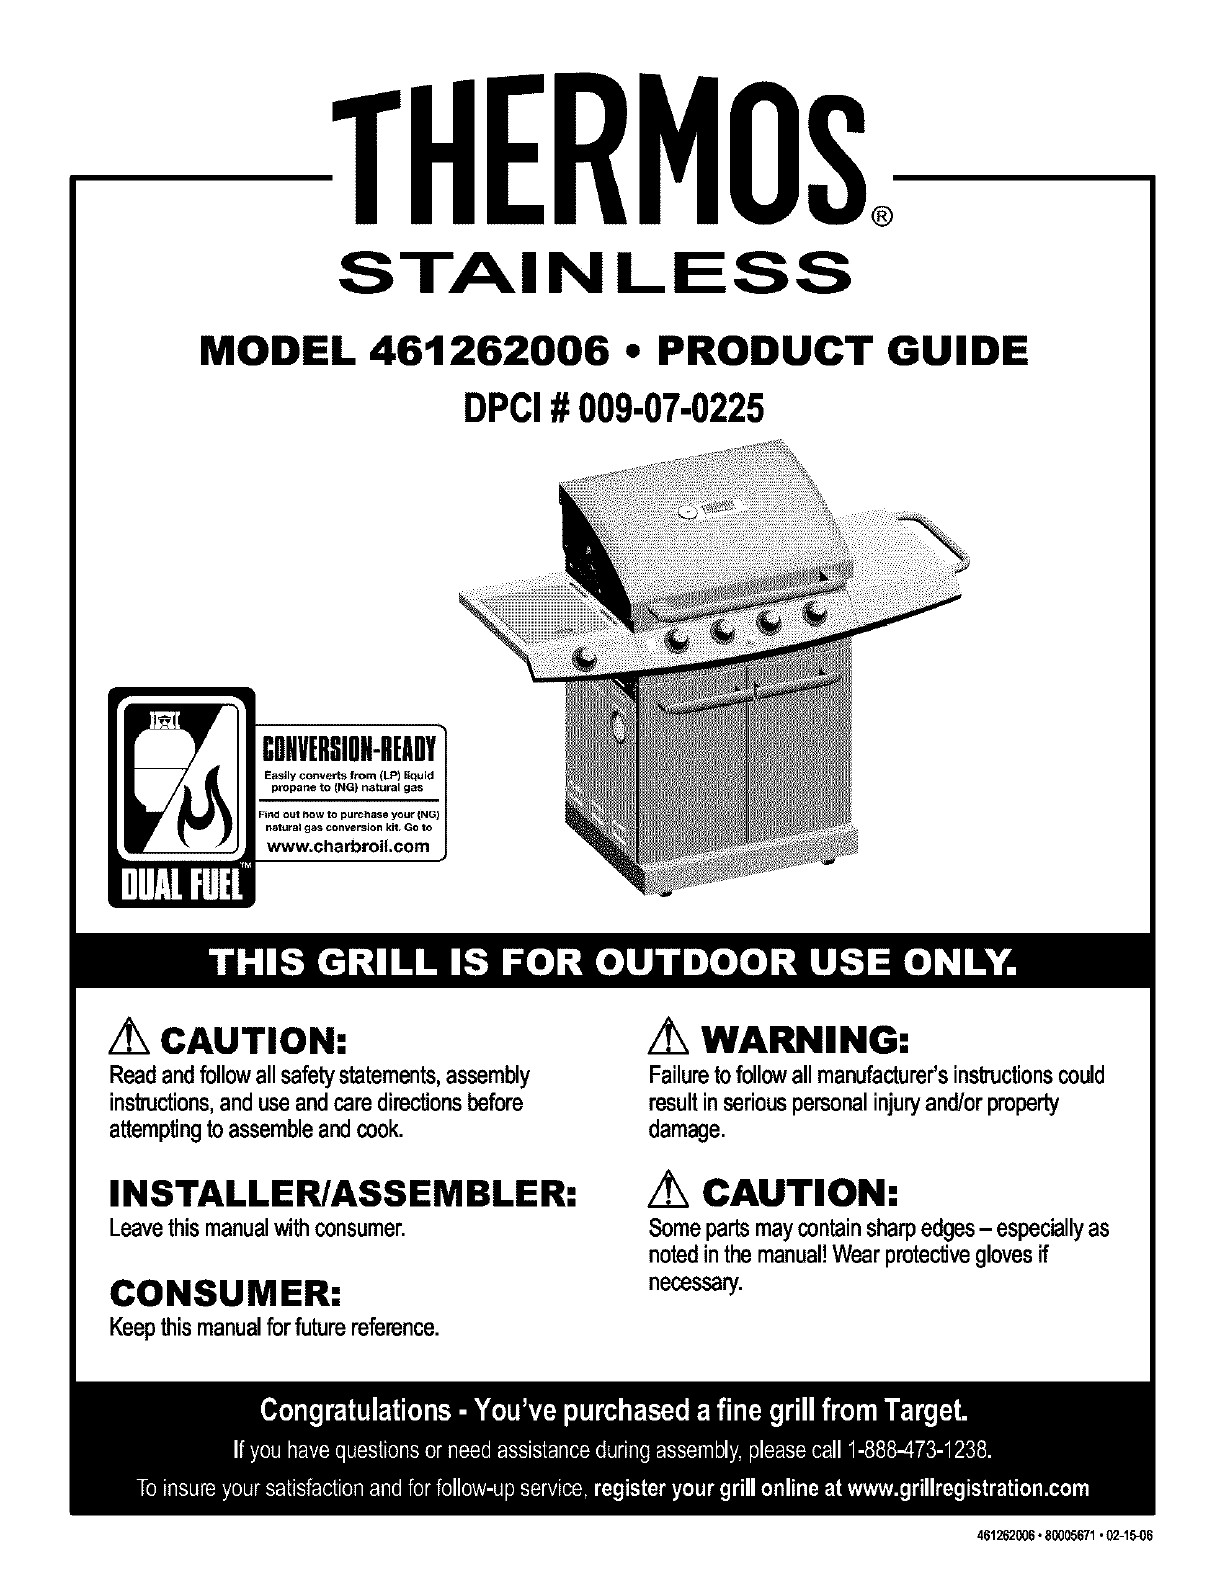 Char Broil Parts Diagram thermos Grill Gas Manual L Of Char Broil Parts Diagram